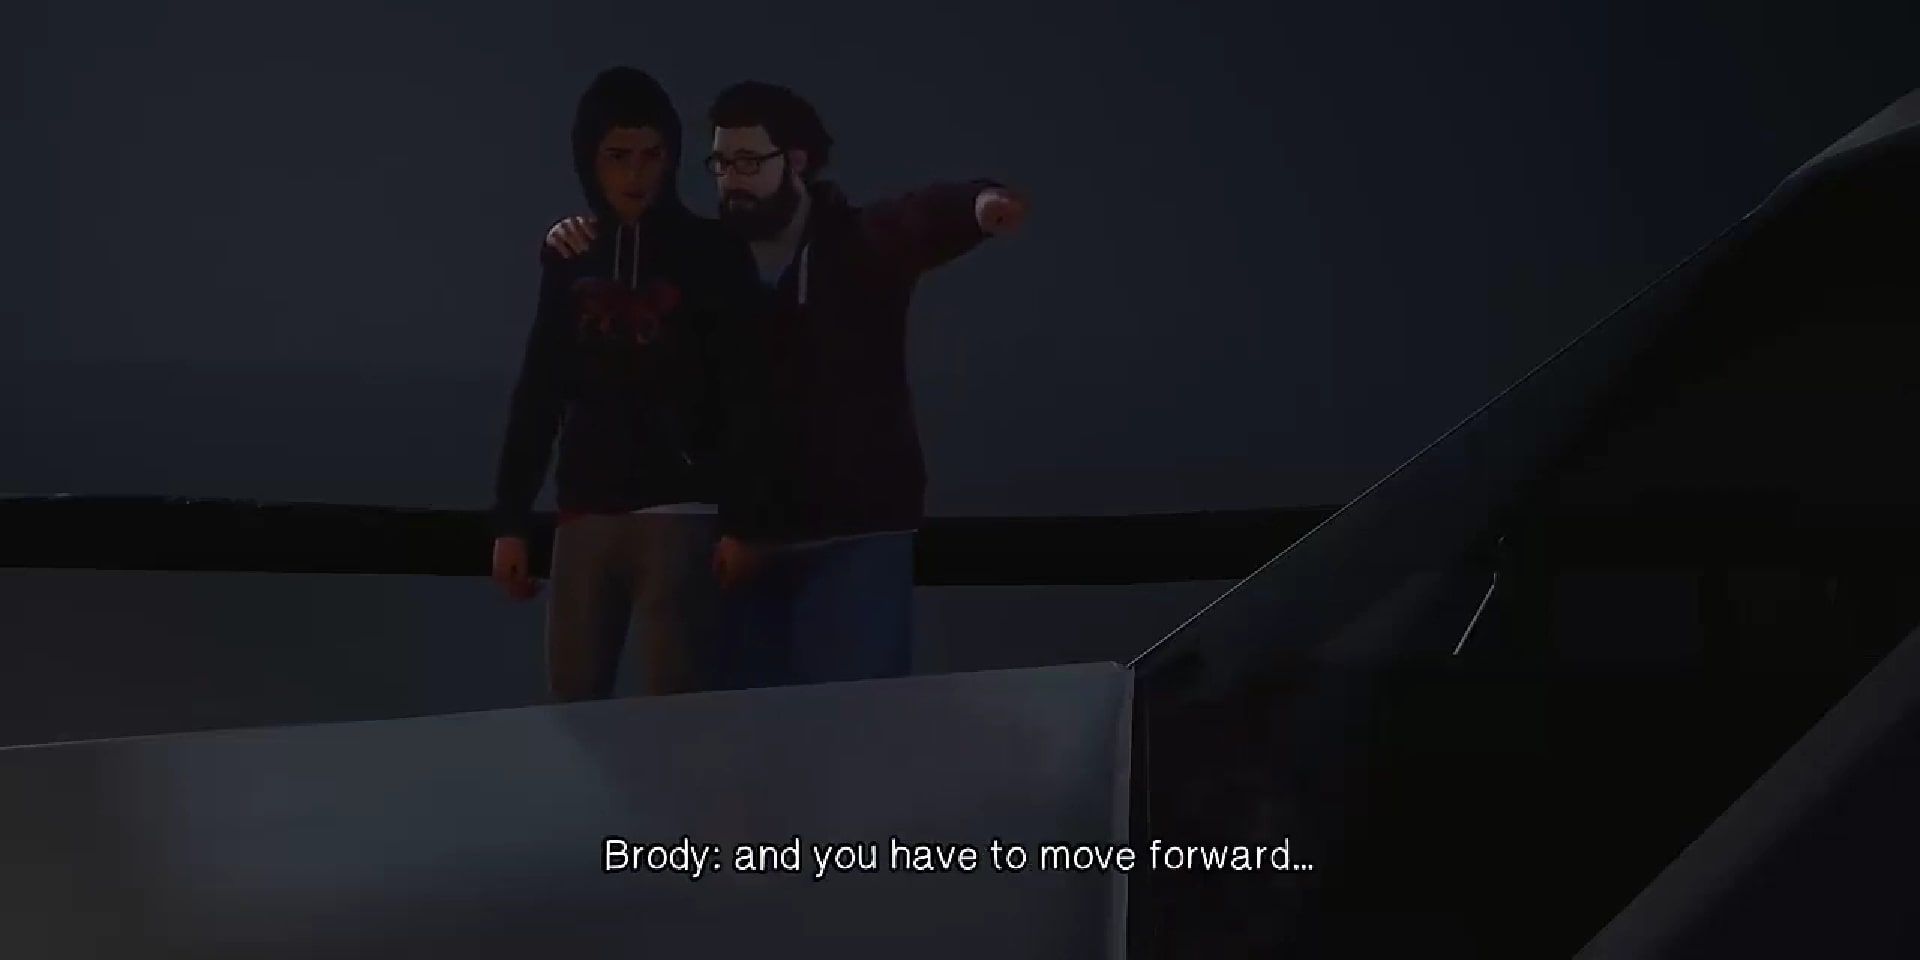 Brody having a heart-to-heart with Sean by wrapping his arm around his shoulder and telling him of how he needs to look after Daniel in Life is Strange 2